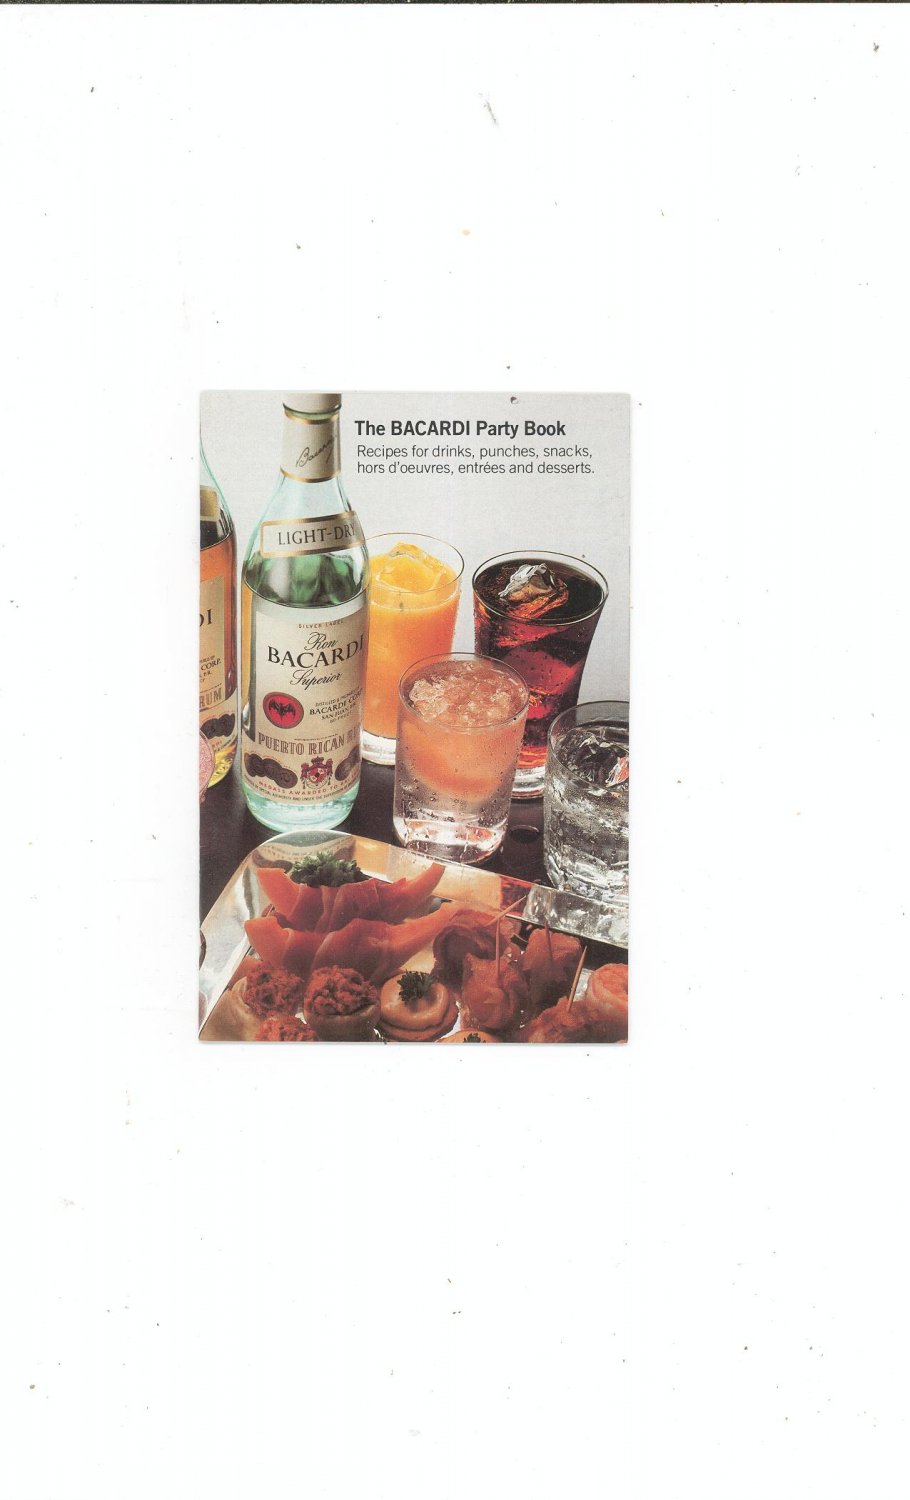 The Bacardi Party Book Cookbook Drinks Punches Snacks Entrees Desserts Vintage 1978